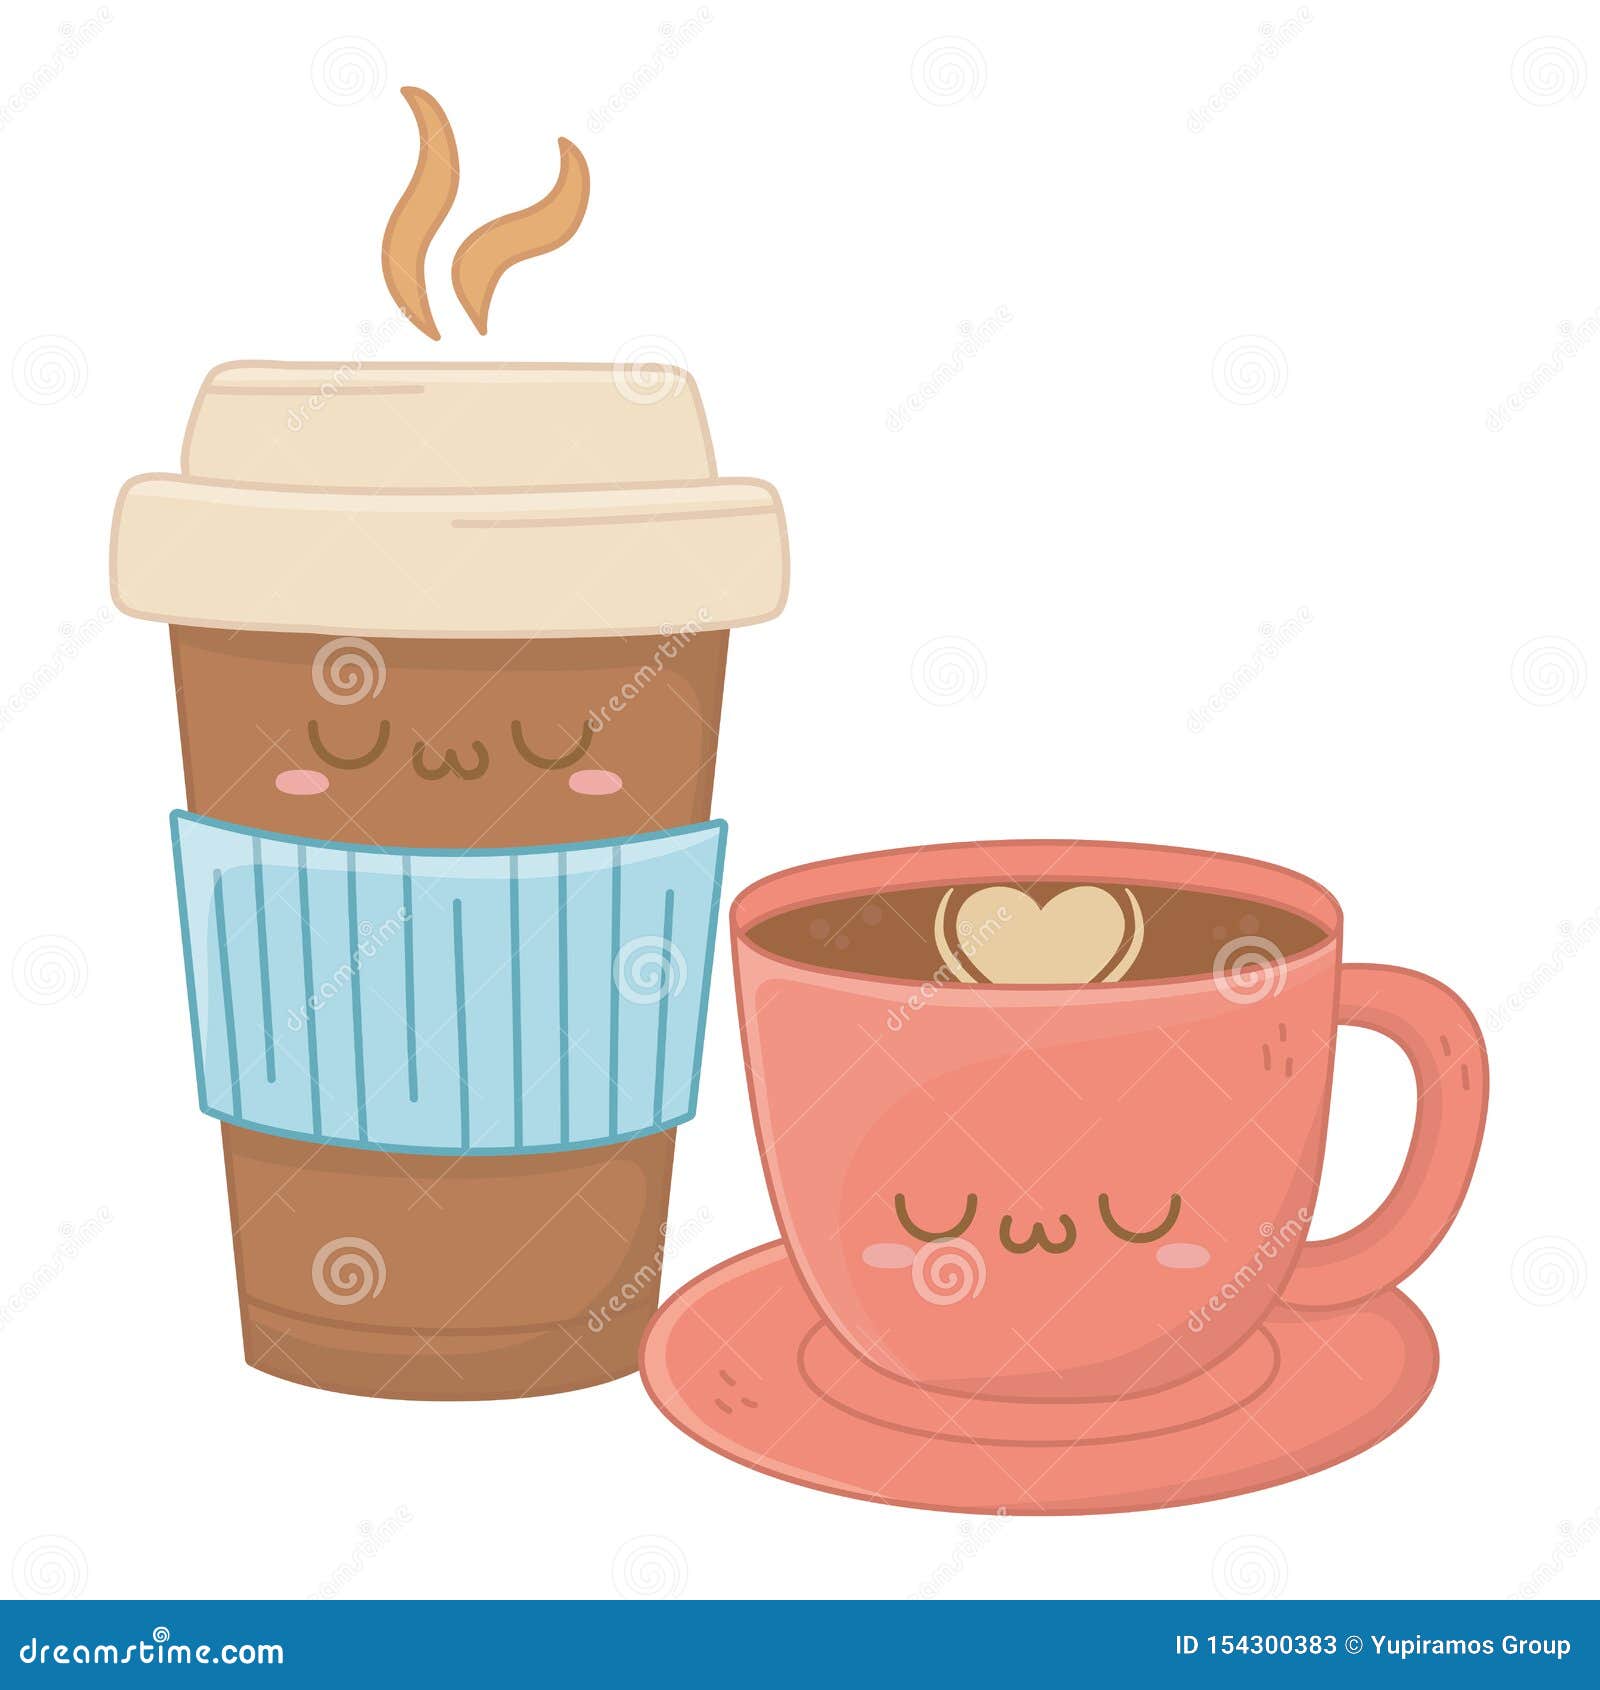 https://thumbs.dreamstime.com/z/kawaii-coffee-cup-cartoon-design-expression-cute-character-funny-emoticon-theme-vector-illustration-154300383.jpg